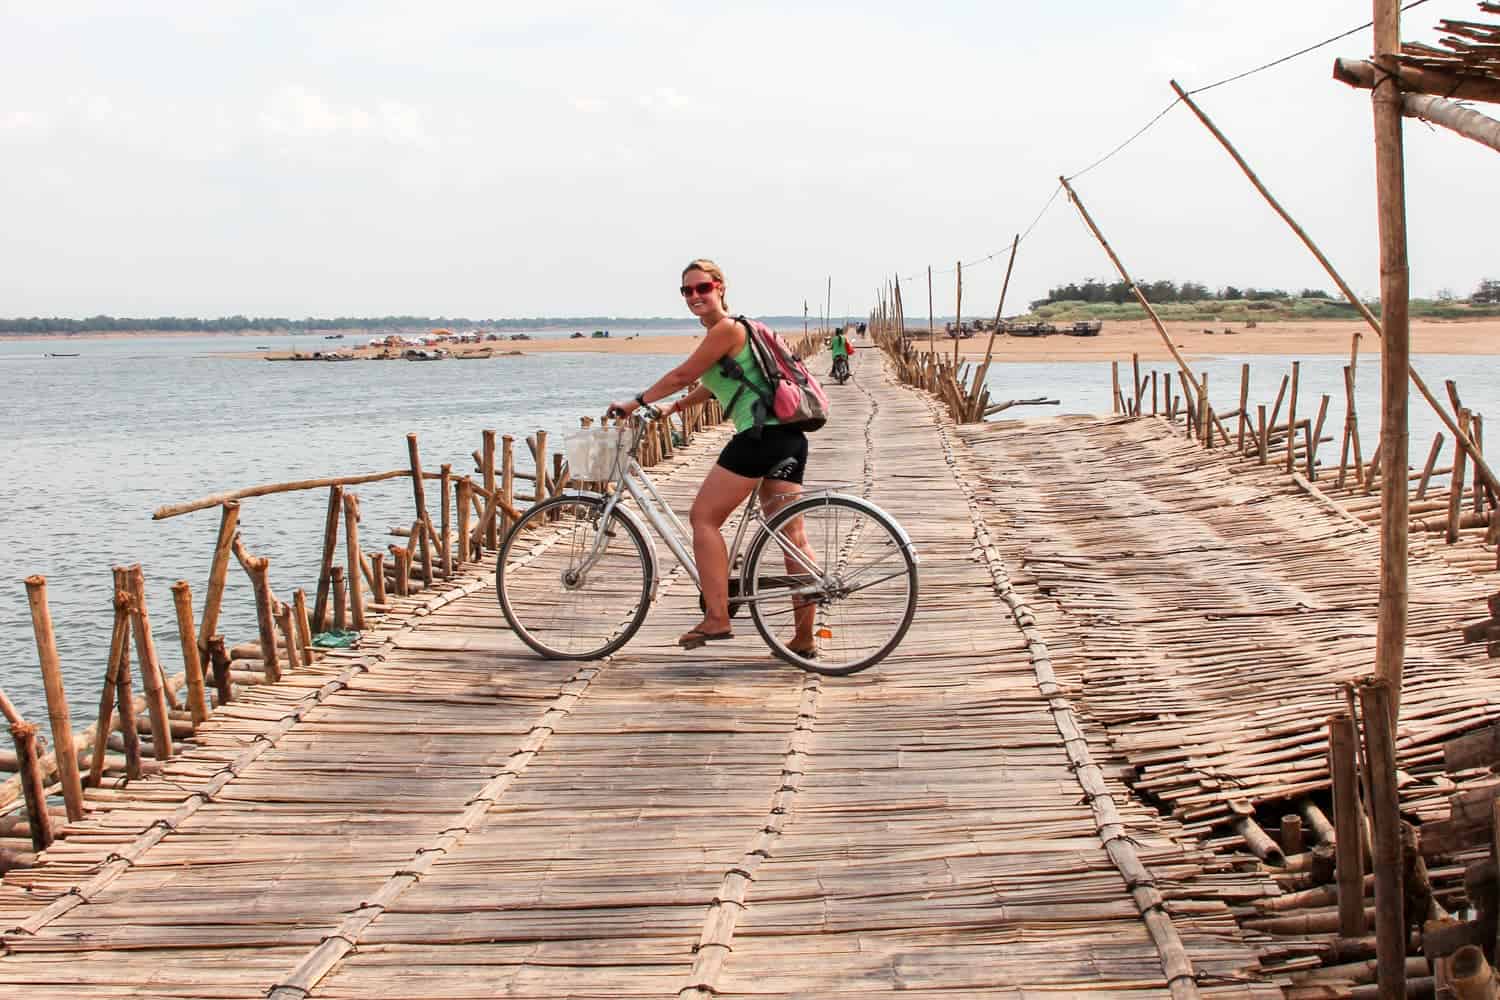 Crossing the bamboo bridge in Kampong Cham by bicycle